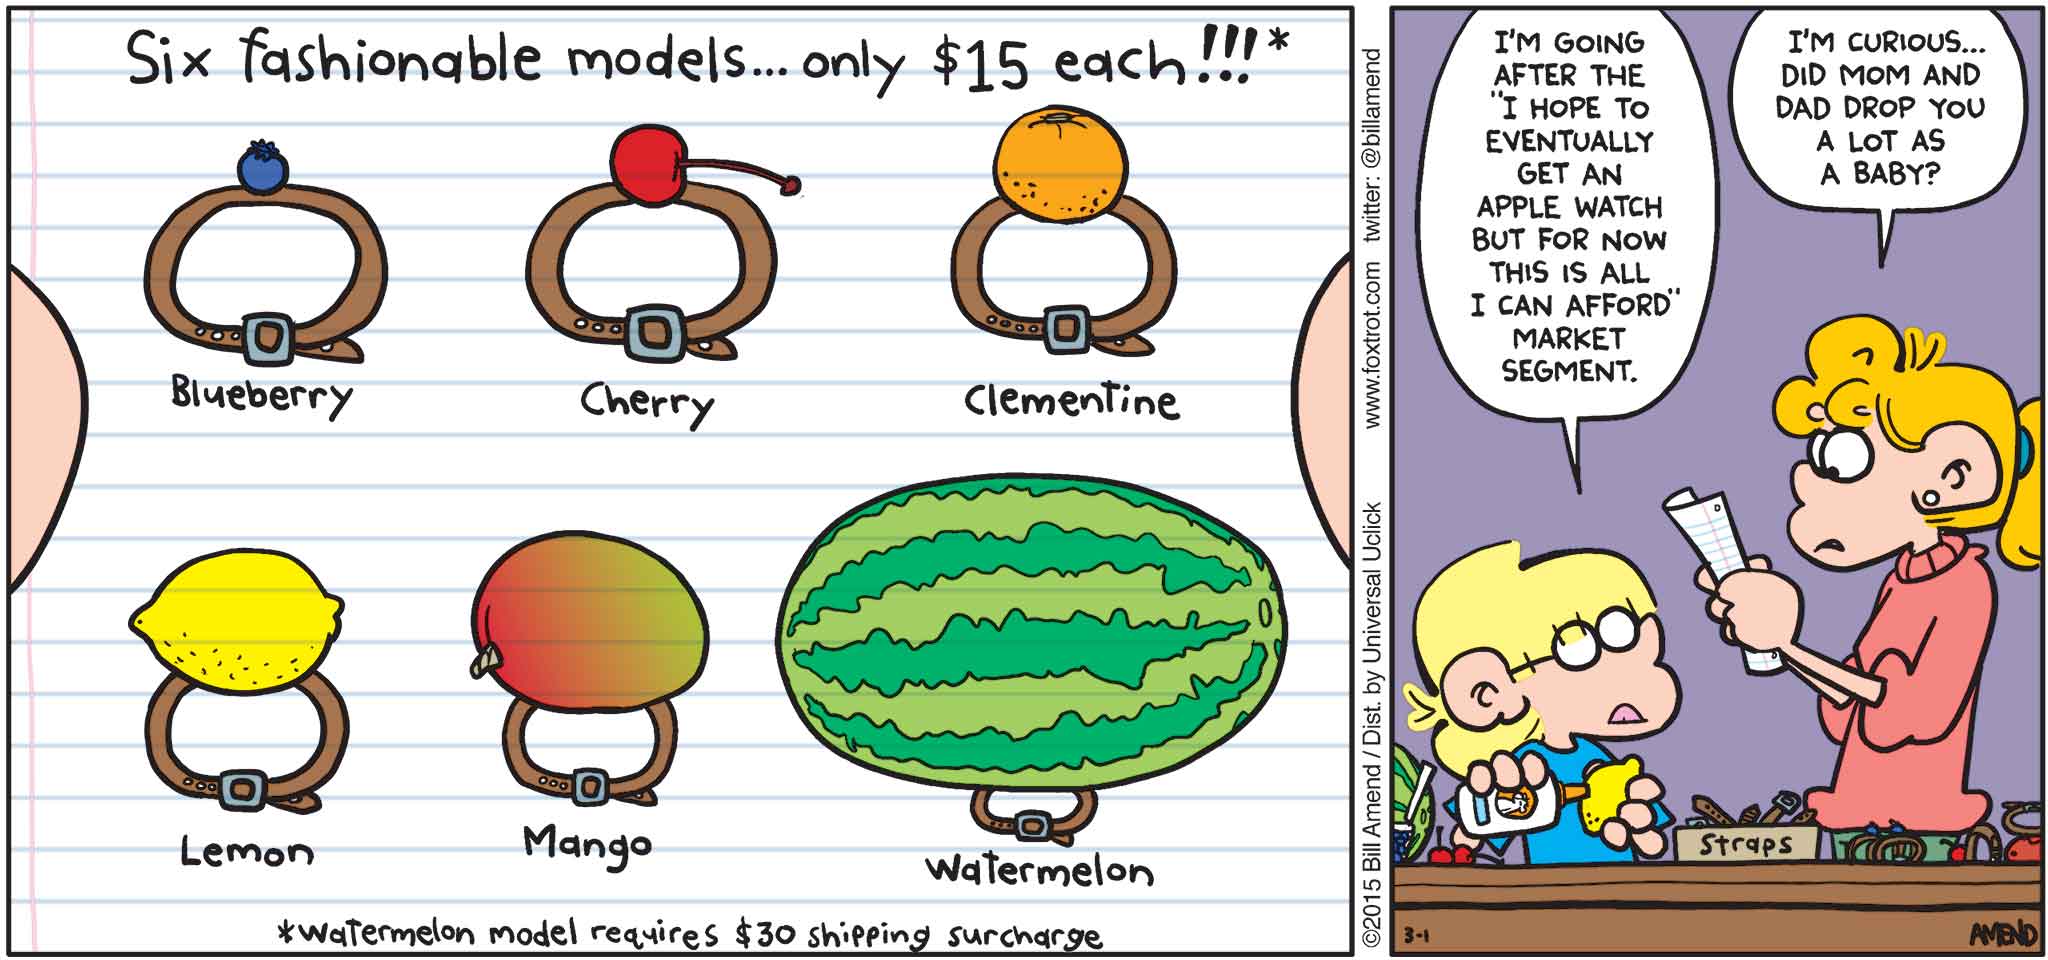 FoxTrot by Bill Amend - "Fashion Fruit" published March 1, 2015 - Jason: I'm going after the "I hope to eventually get an Apple Watch but for now this is all I can afford" market segment. Paige: I'm curious... Did mom and dad drop you a lot as a baby?